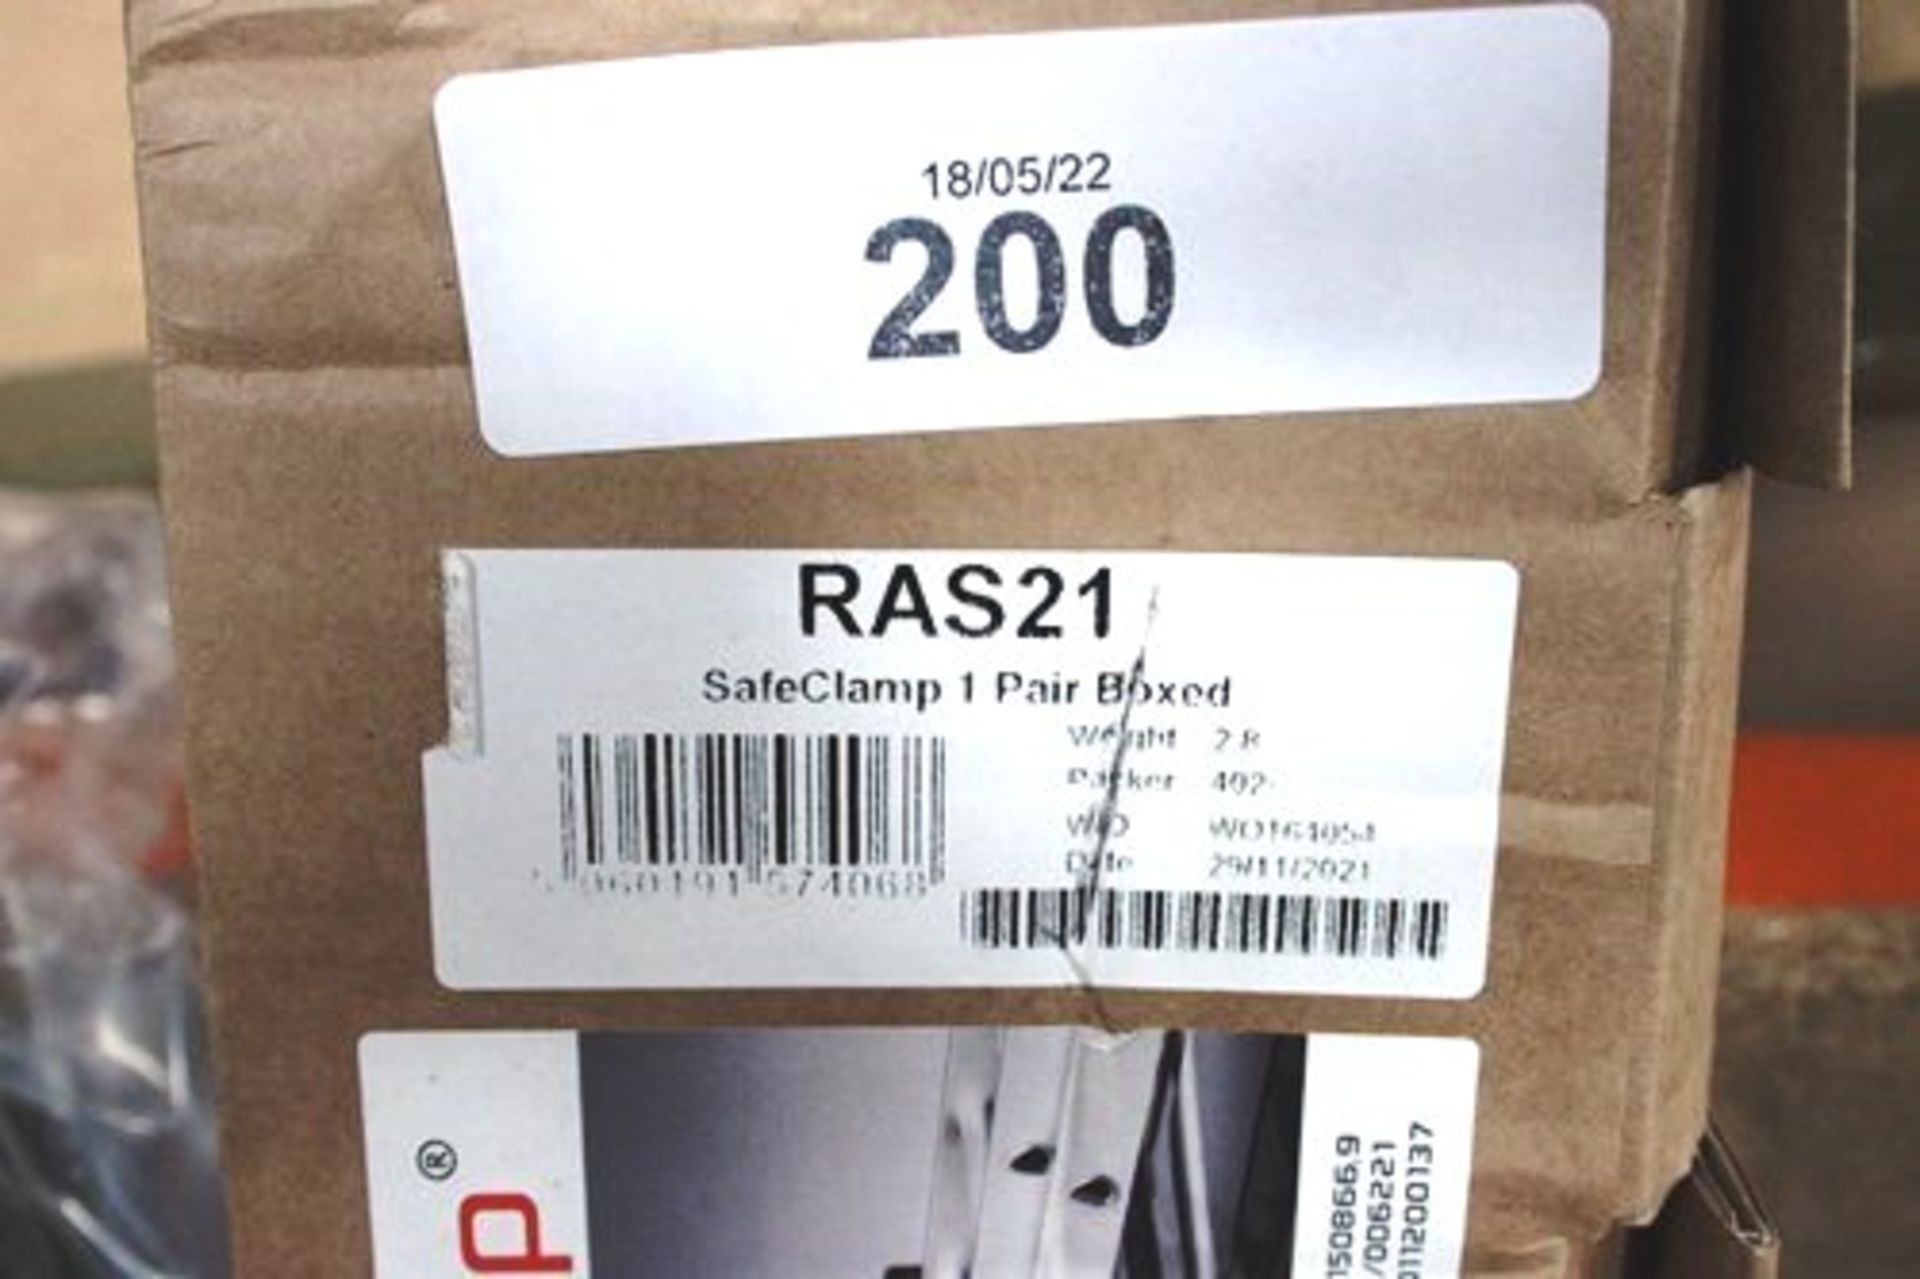 A pair of Rhino safe clamp ladder storage clamps, model RAS21 - New in box (GS14) - Image 2 of 2